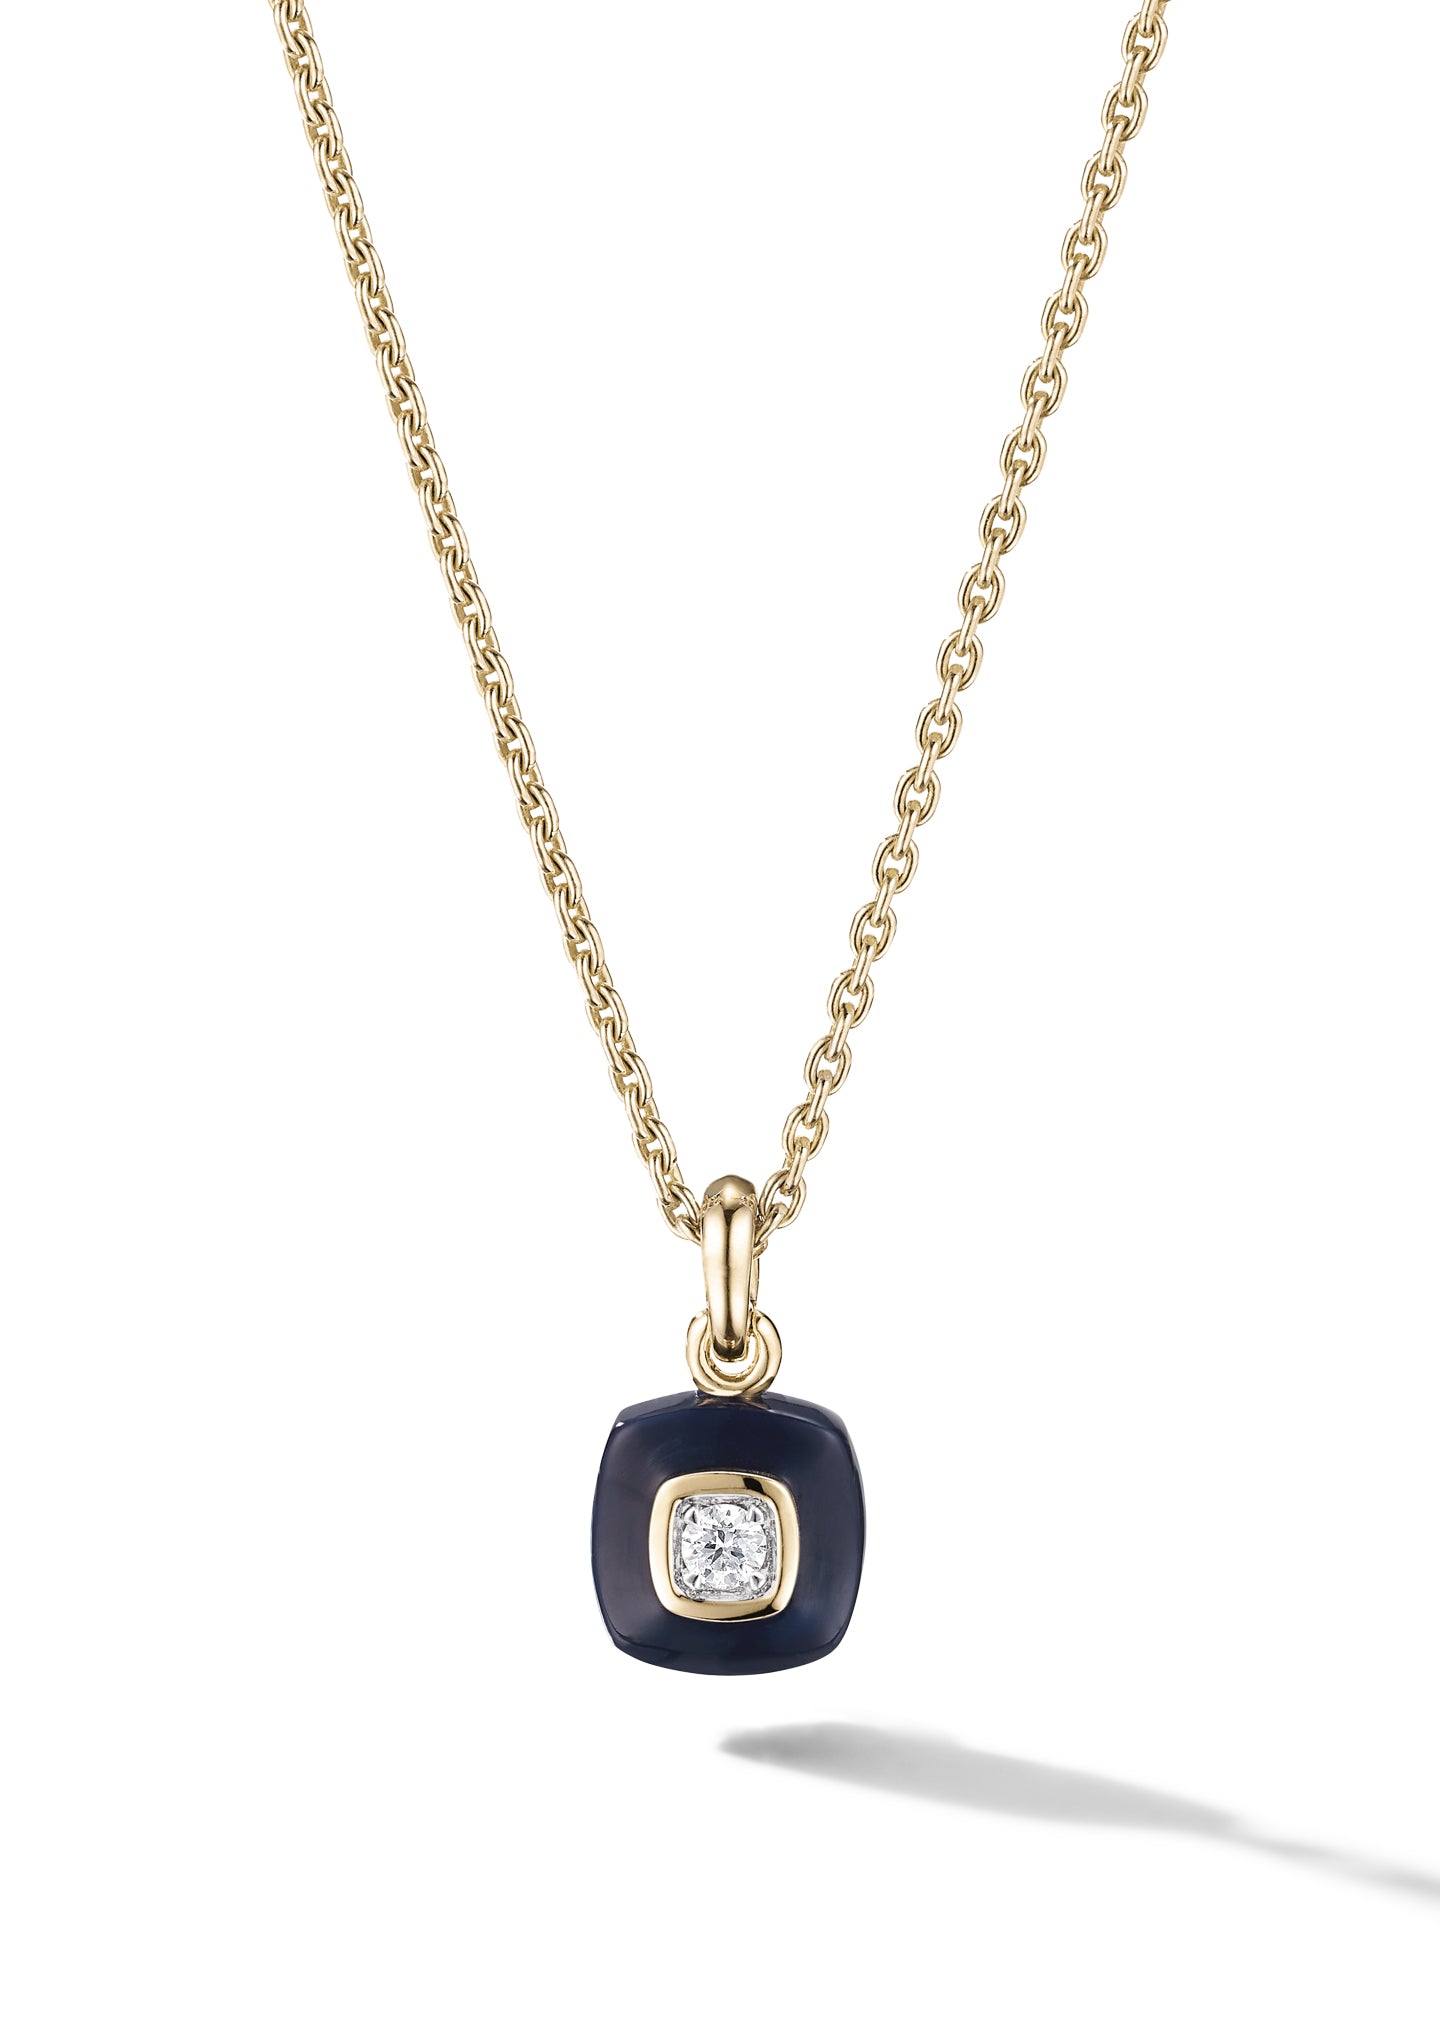 The Brilliant Pendant Necklace with Gold Bail gallery image